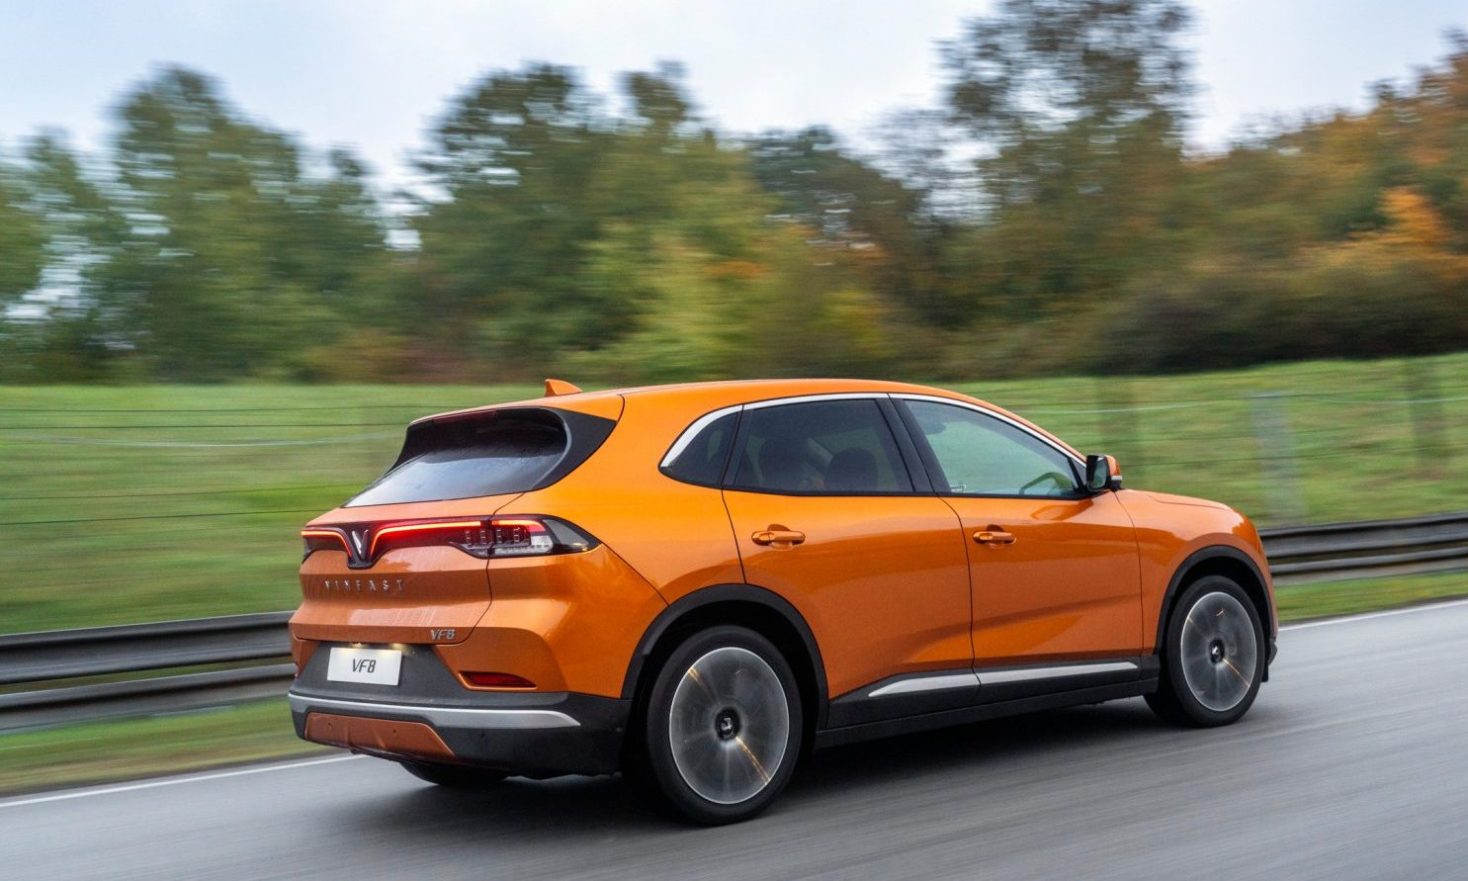 Introducing the 2023 Vinfast VF8 SUV: An All-Electric Powerhouse